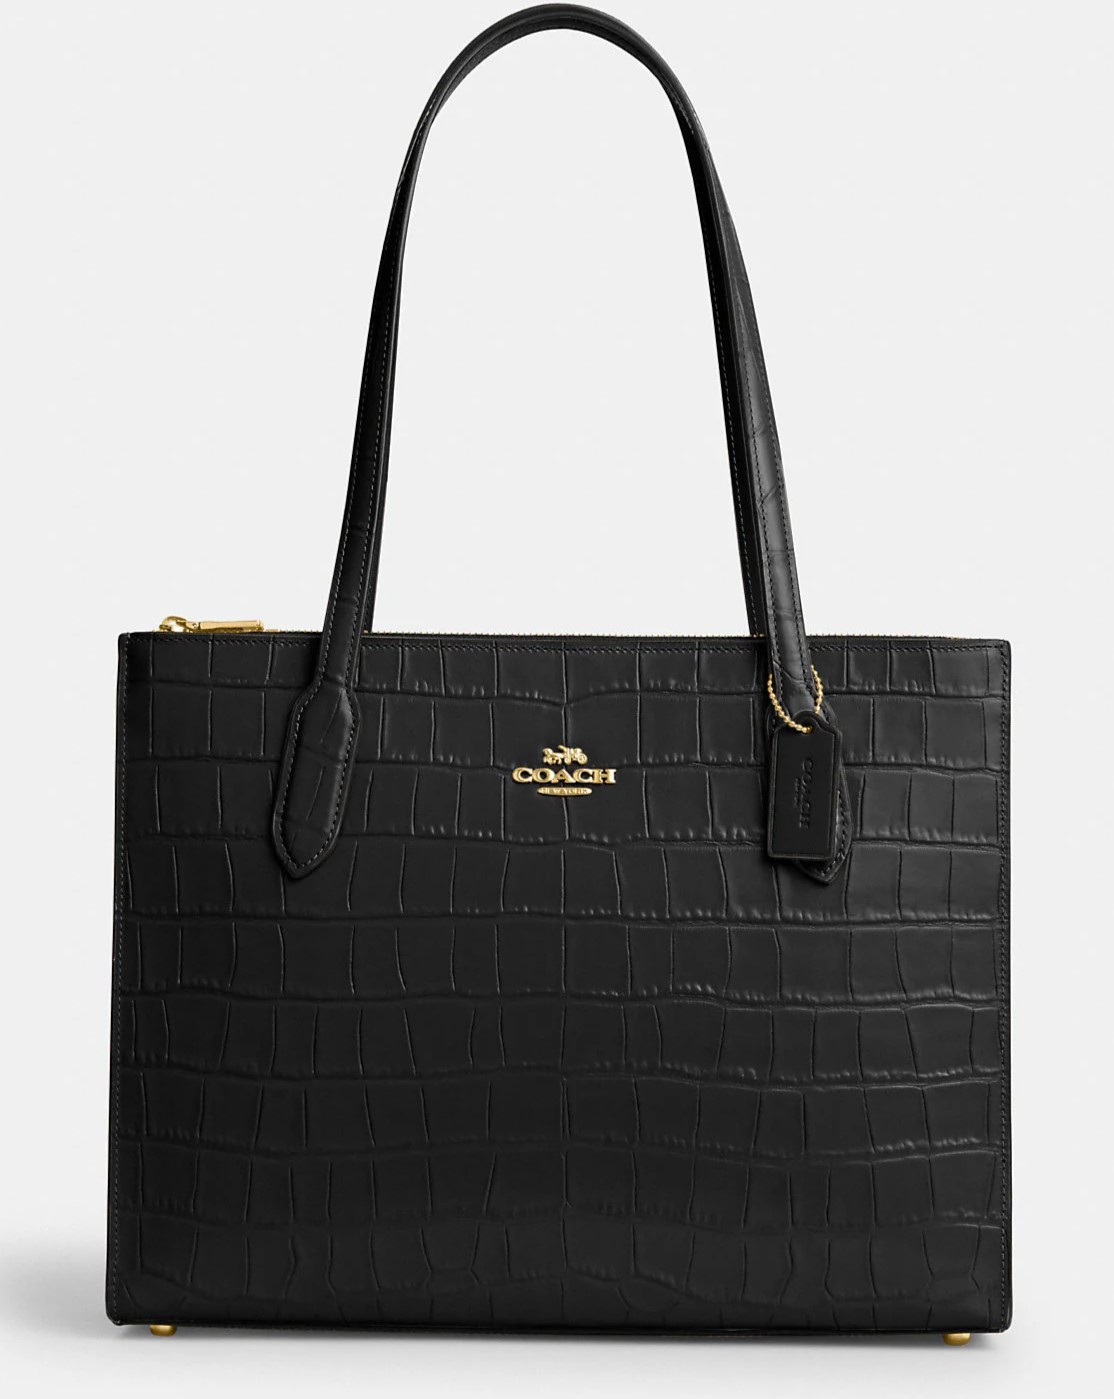 TÚI COACH NỮ NINA TOTE CROCODILE-EMBOSSED LEATHER AND SMOOTH LEATHER BAG IN GOLD BLACK CL654 9